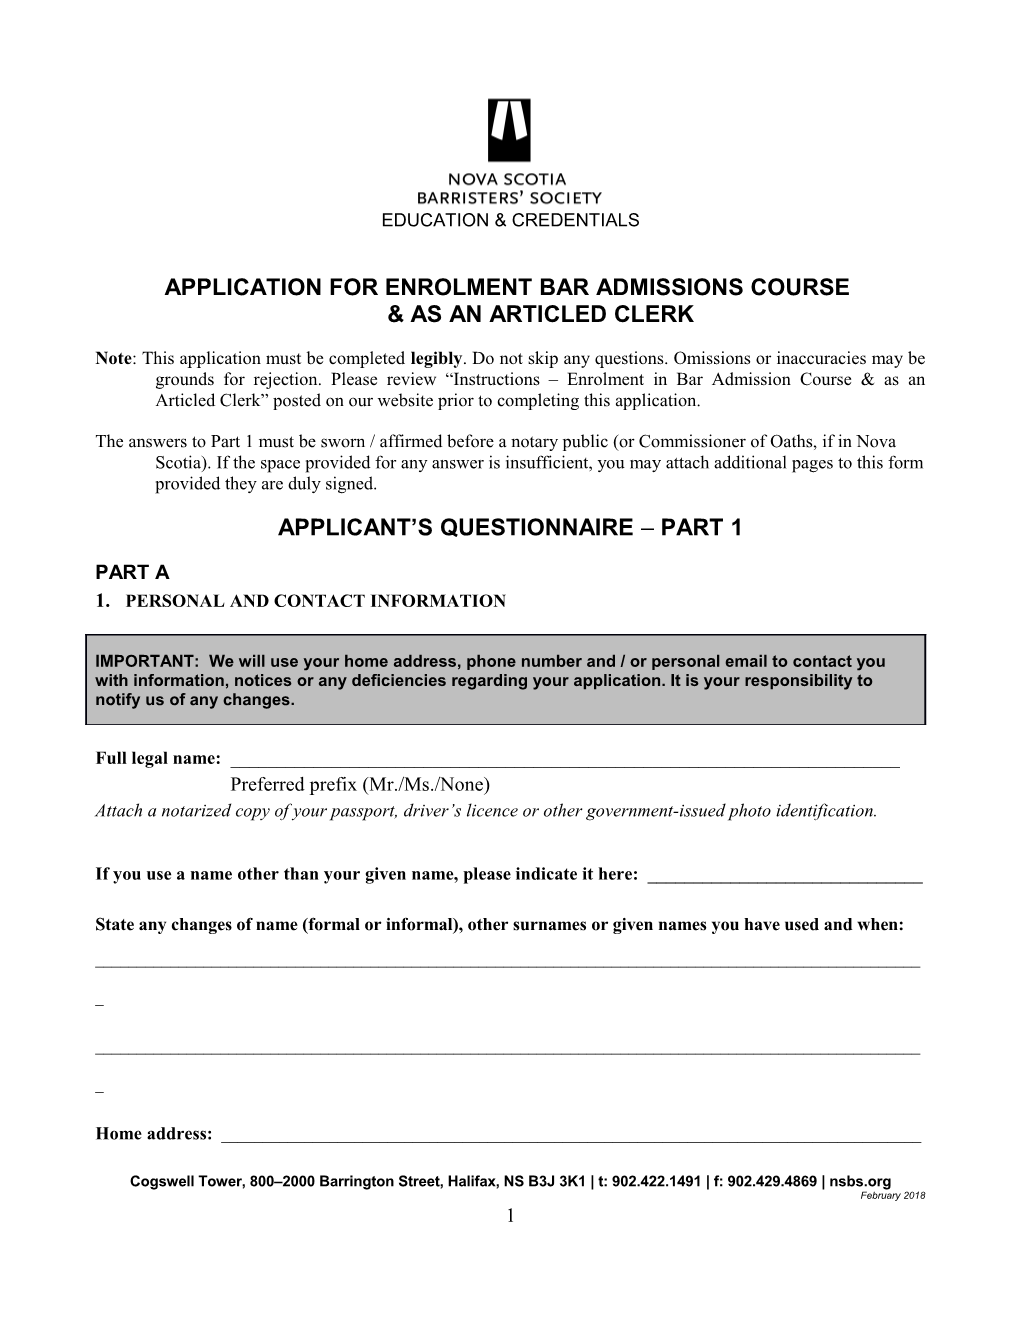 APPLICATION for Enrolment in Bar Admission Course & As an Articled Clerk